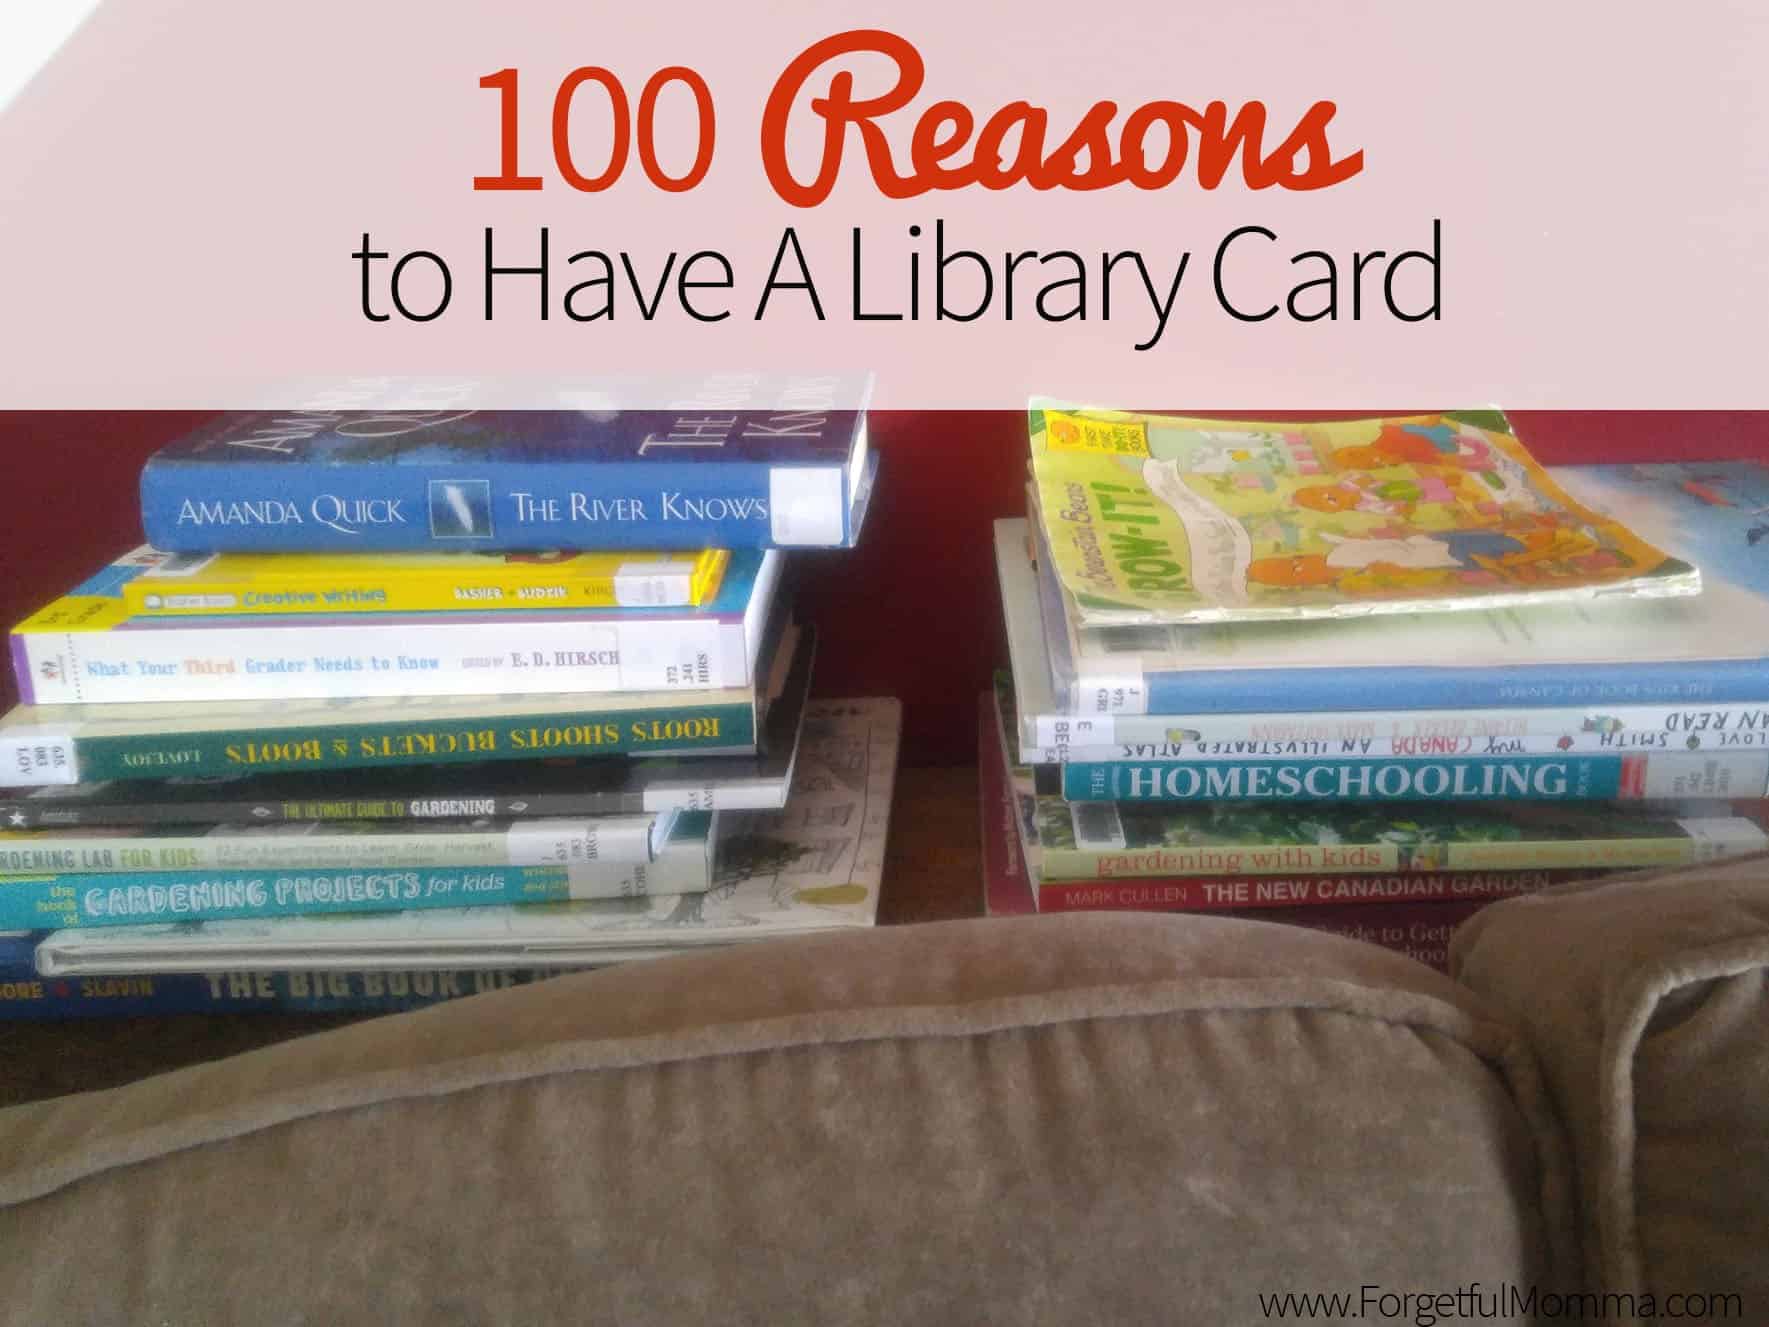 100 reasons to have a library card